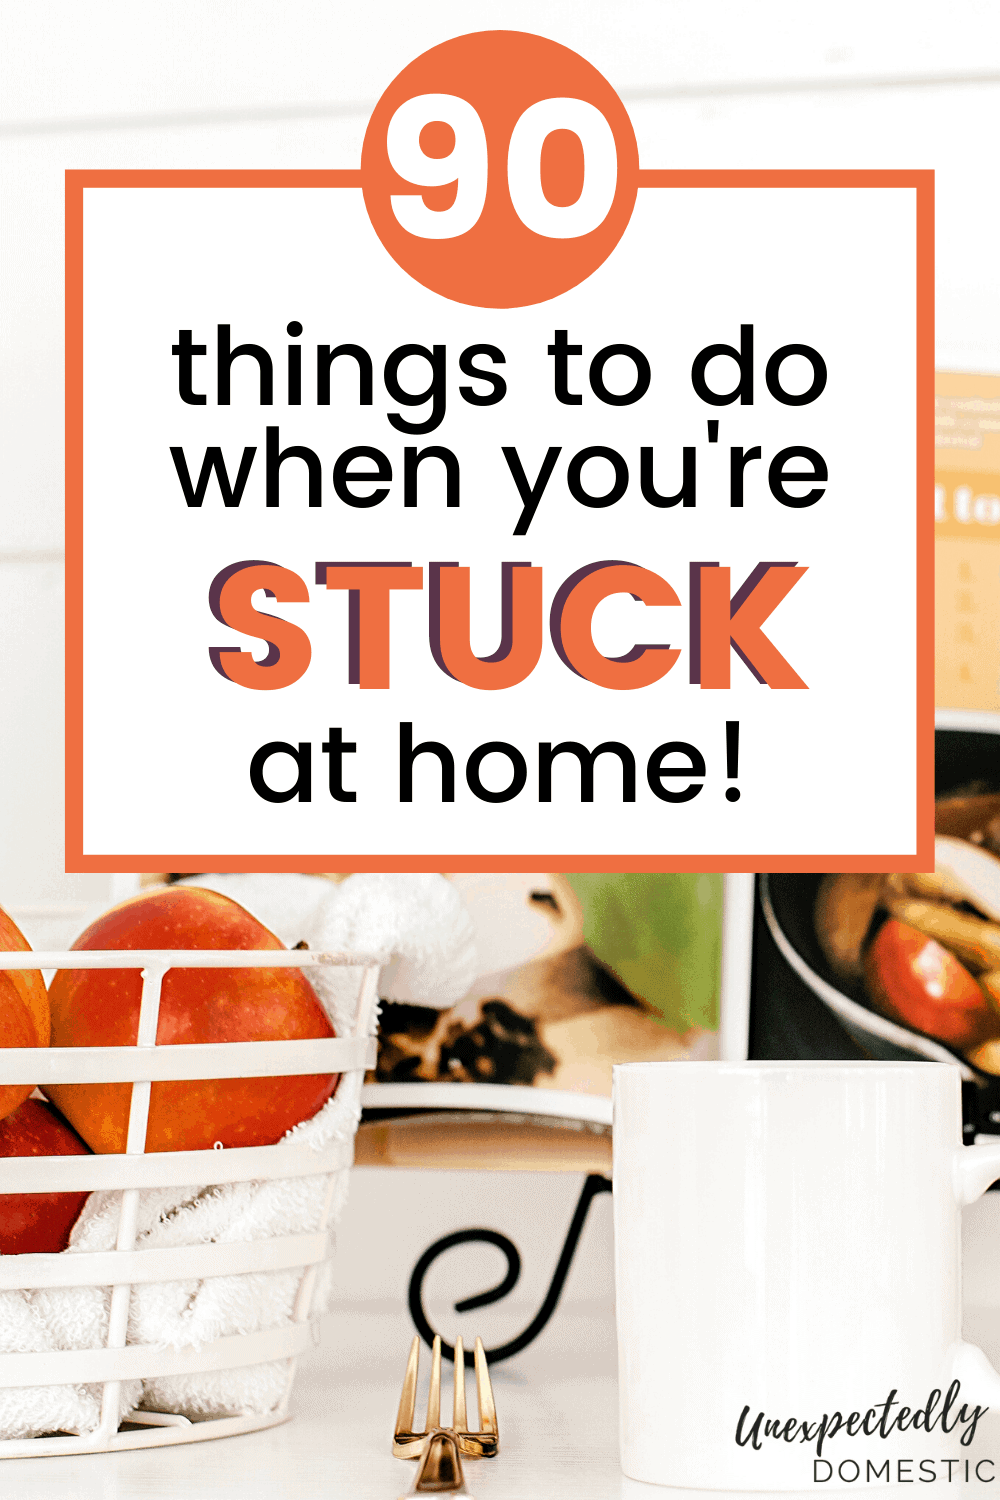 75 Fun Things To Do When You're Bored At Home - Mint Notion